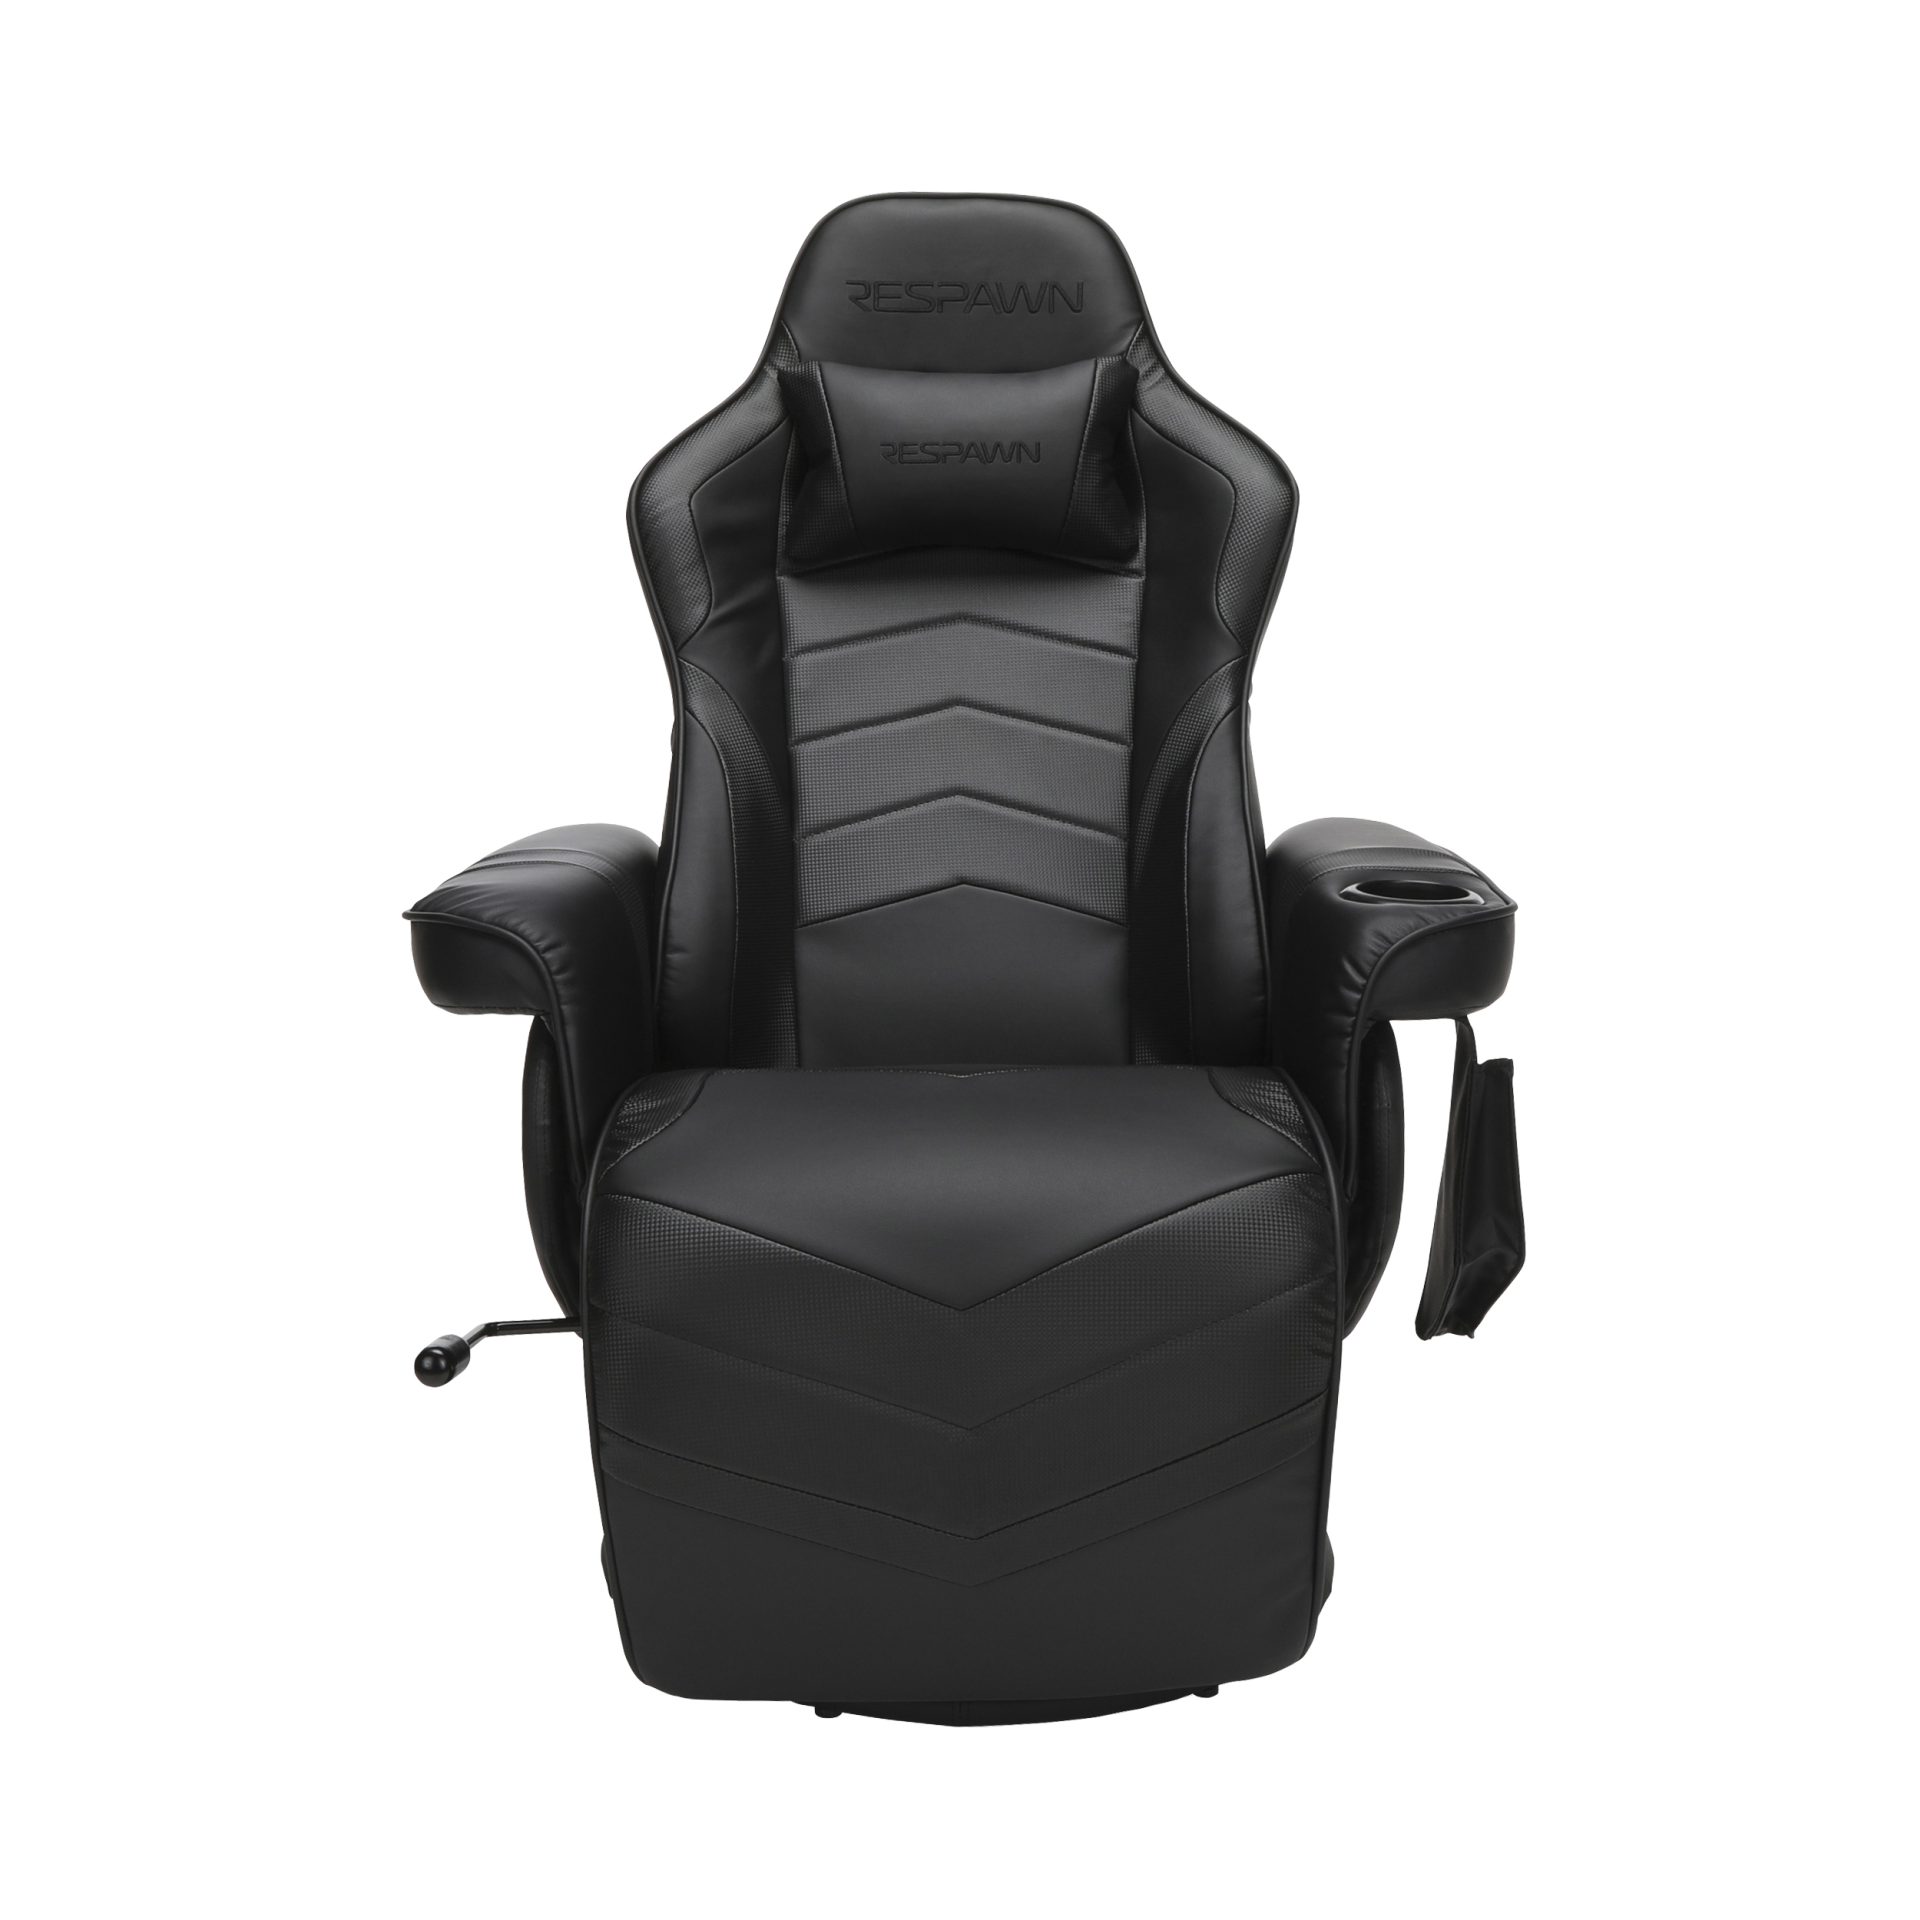 RESPAWN RSP-900 Gaming Recliner #2